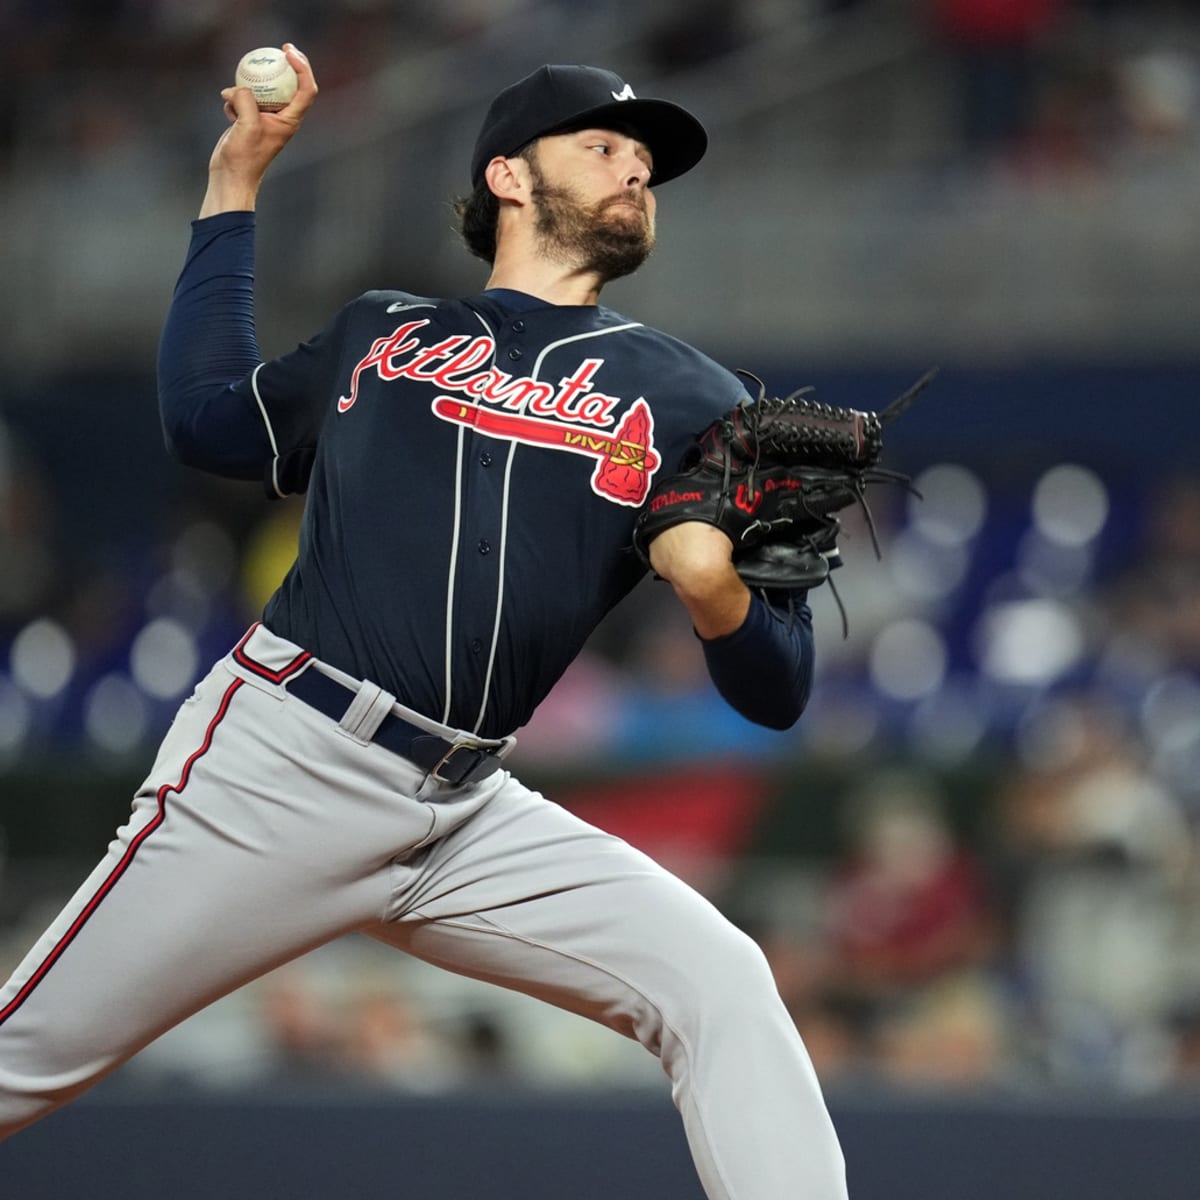 BREAKING: Atlanta Braves Pitcher Ian Anderson to Undergo Tommy